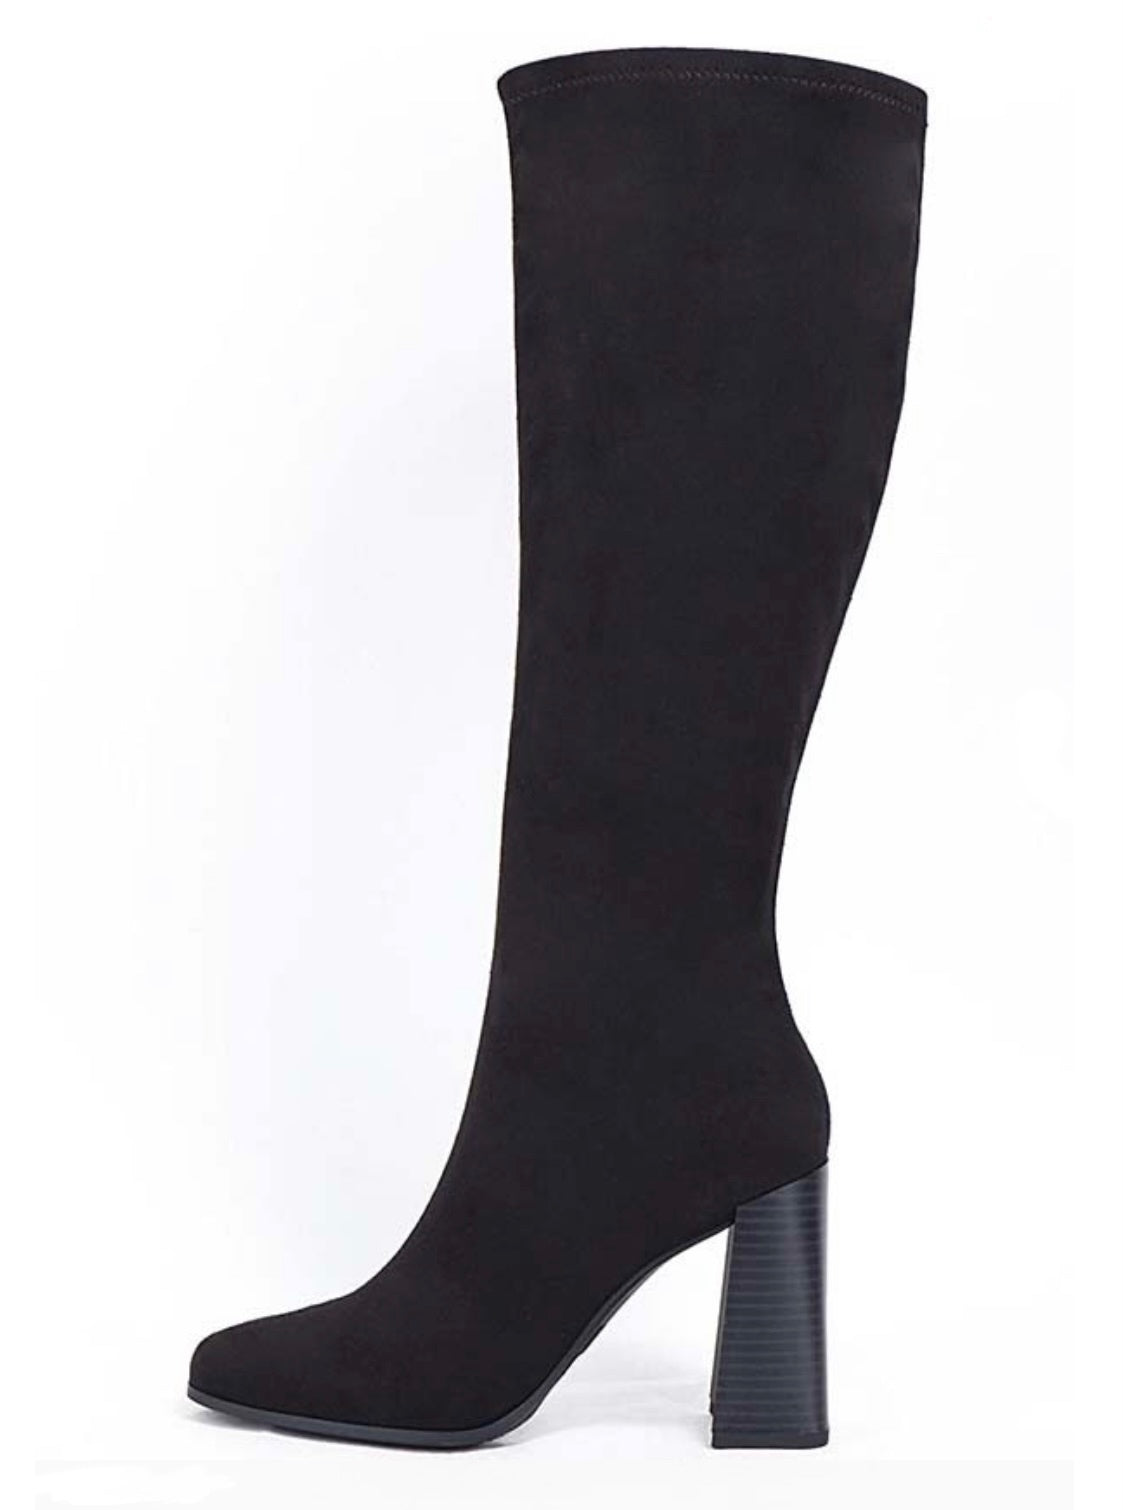 Therapy Shoes Wolf Black | Women's Boots | Knee High | Tall | 90's